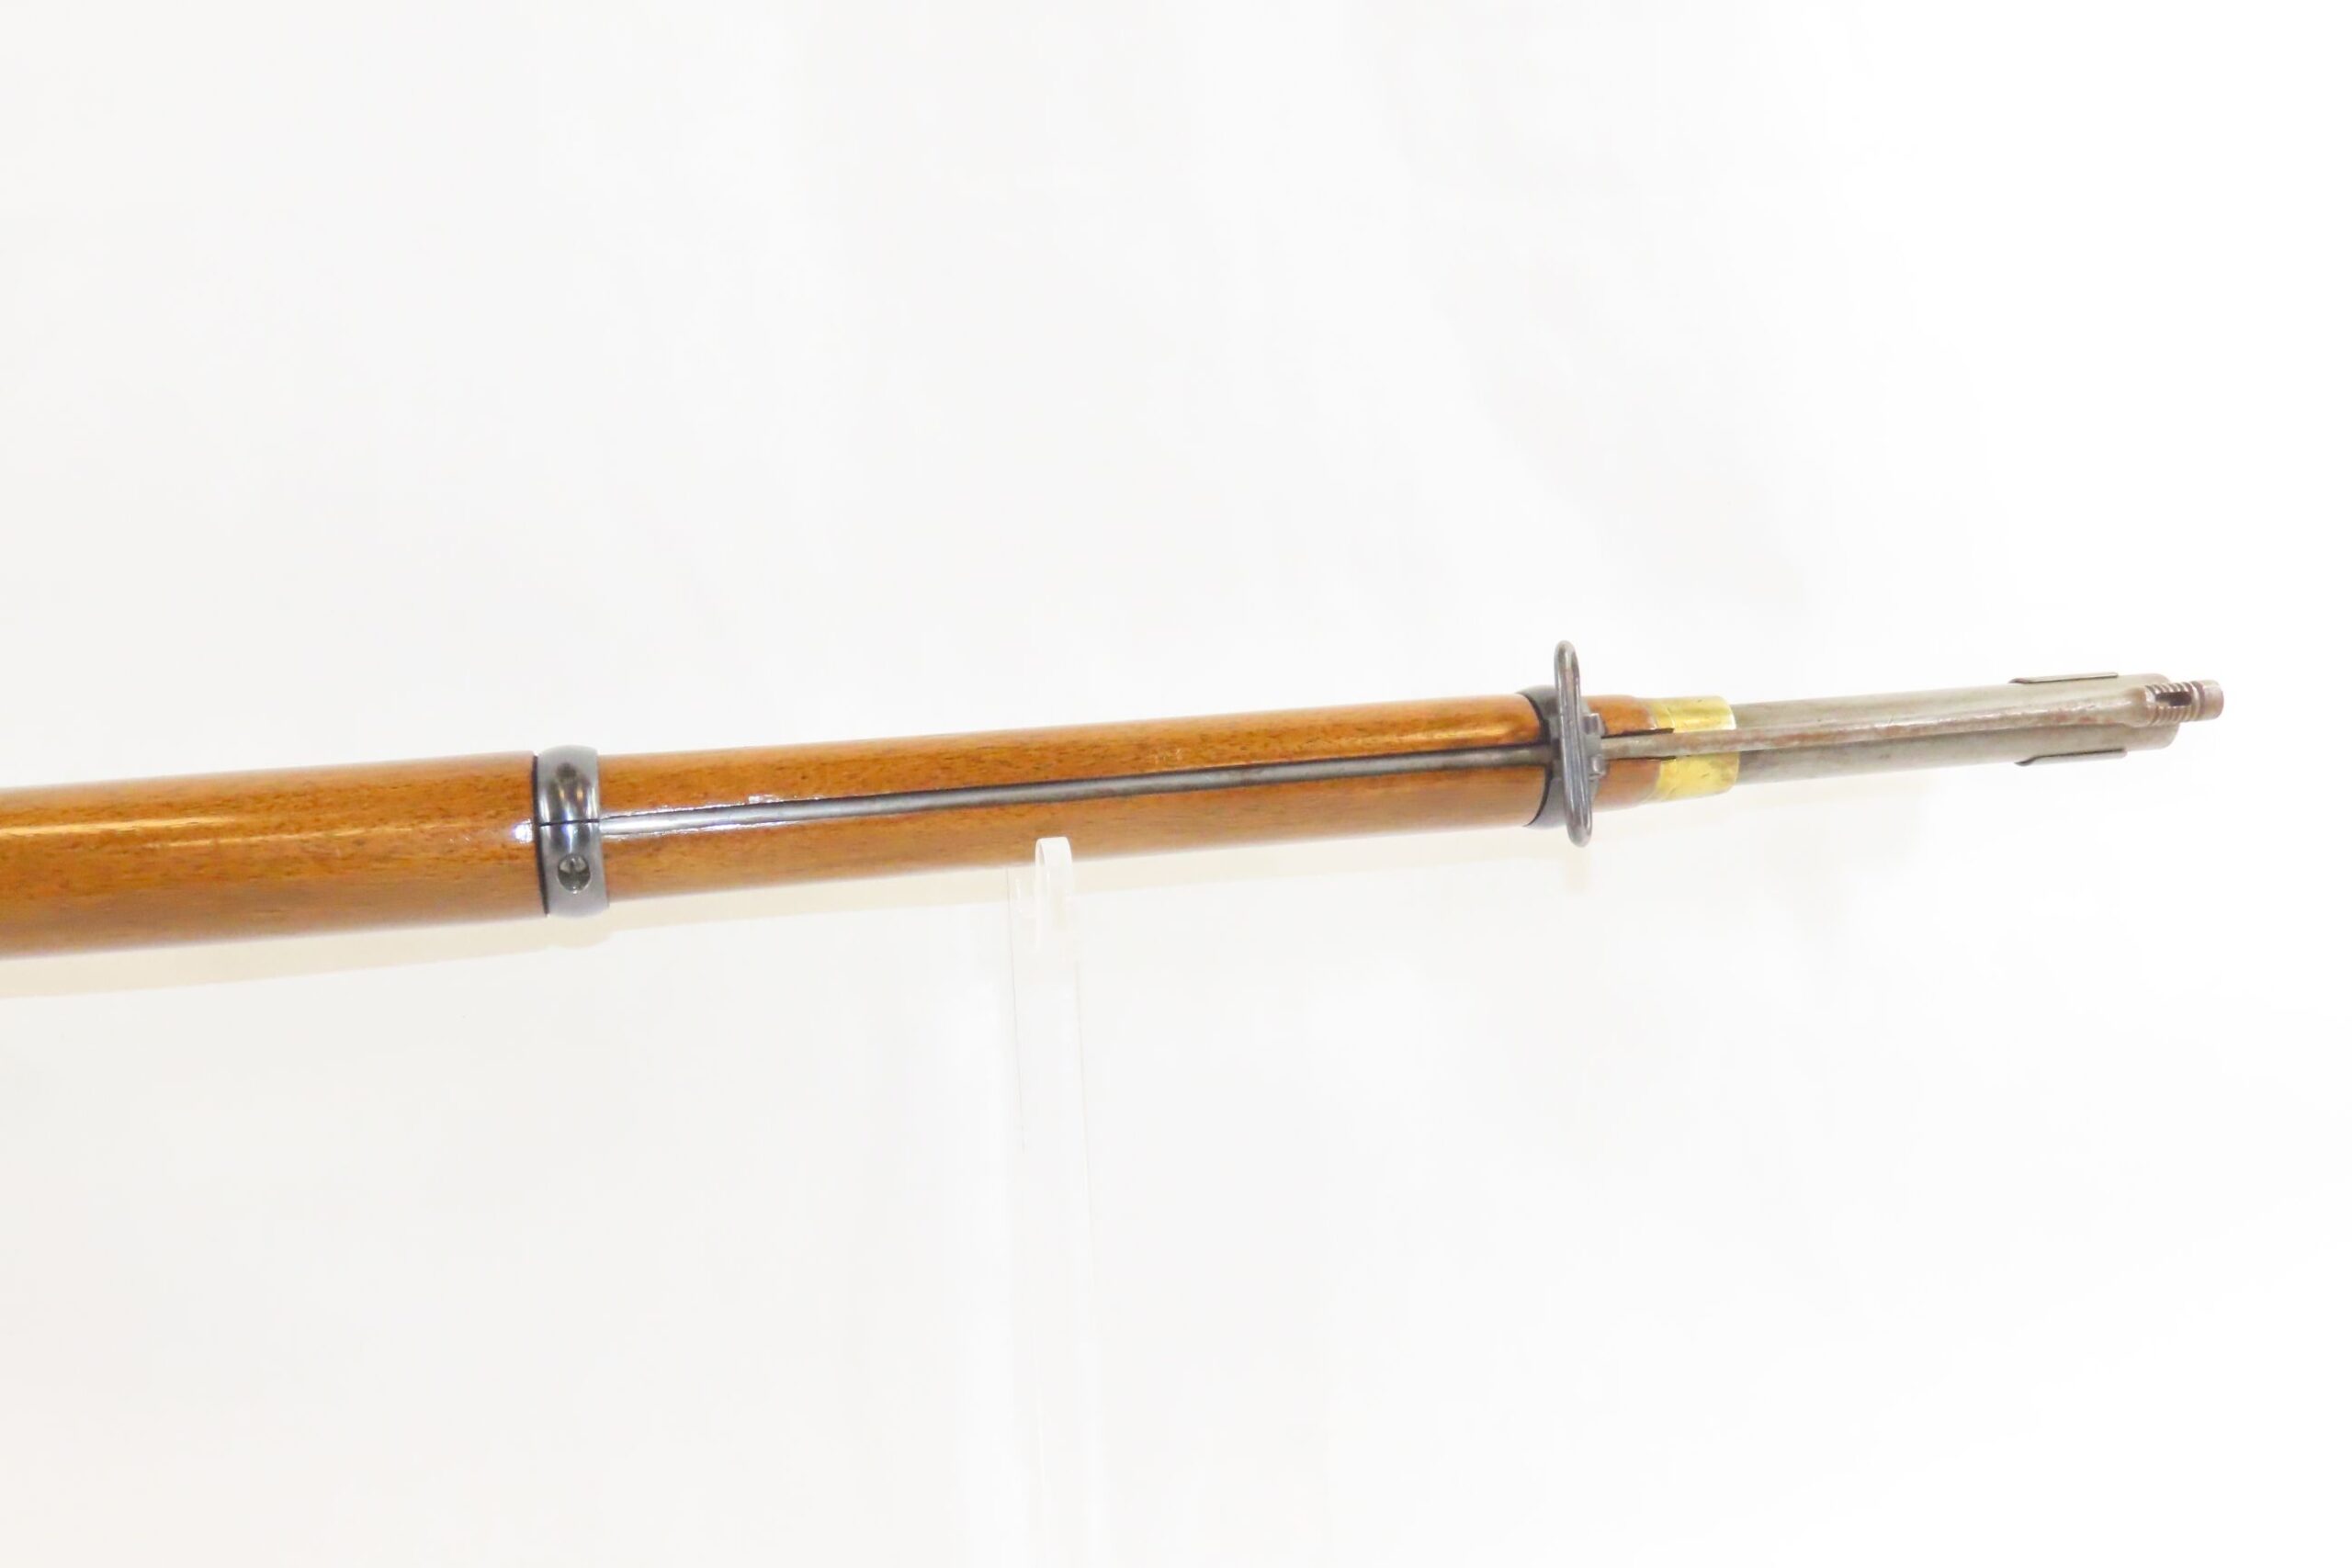 https://www.ancestryguns.com/wp-content/uploads/2023/04/Belgian-Two-Band-Enfield-Style-Percussion-Rifle-4.14-CRAntique007-scaled.jpg